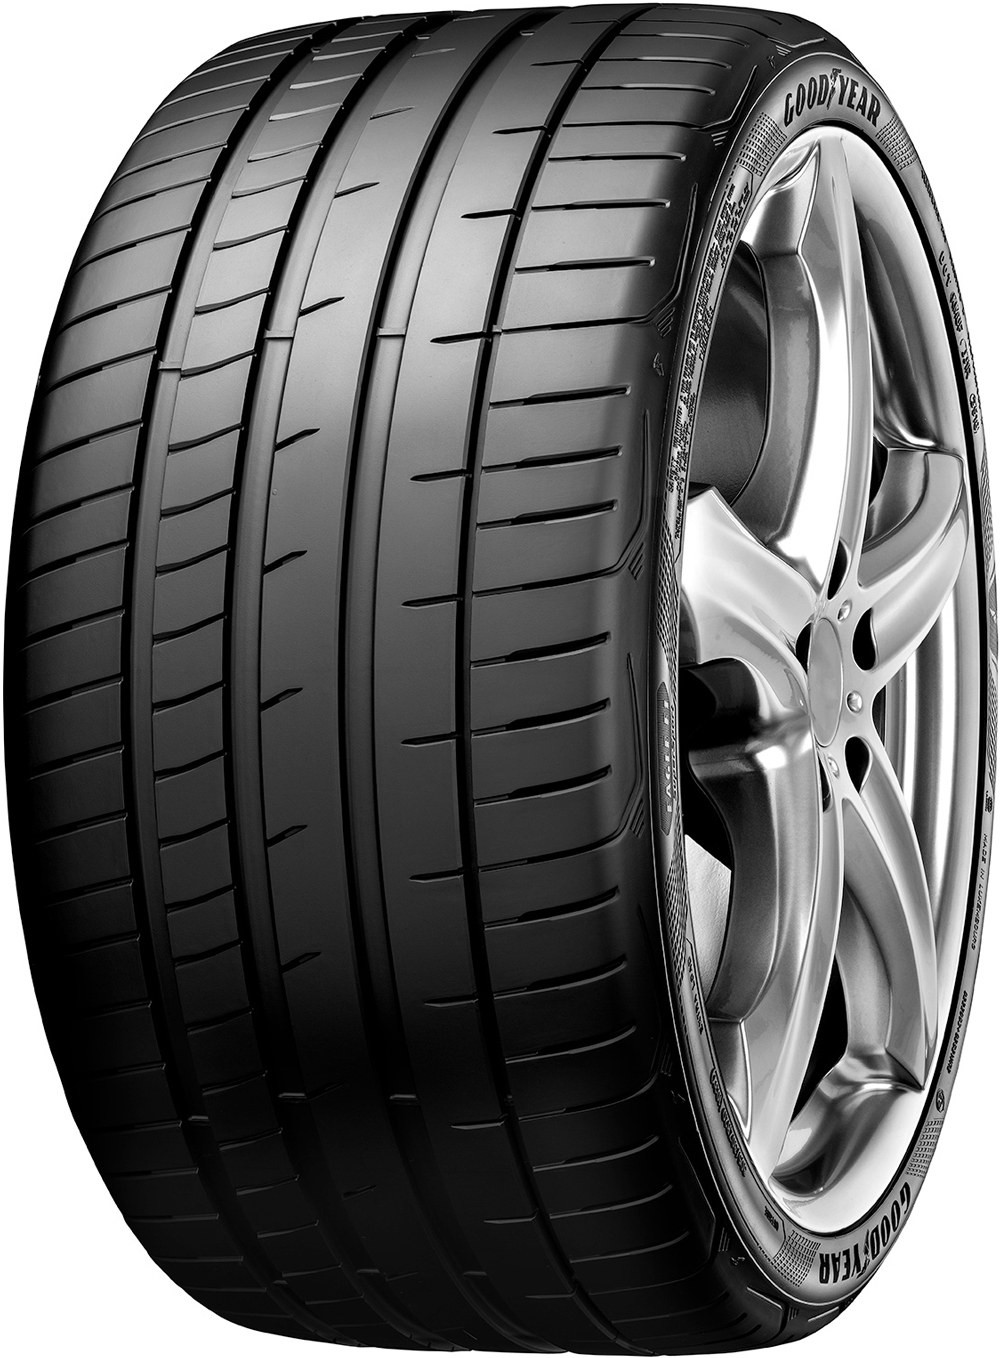 Anvelope auto GOODYEAR EAG F1 SUPERSPORT XL 245/35 R20 95Y